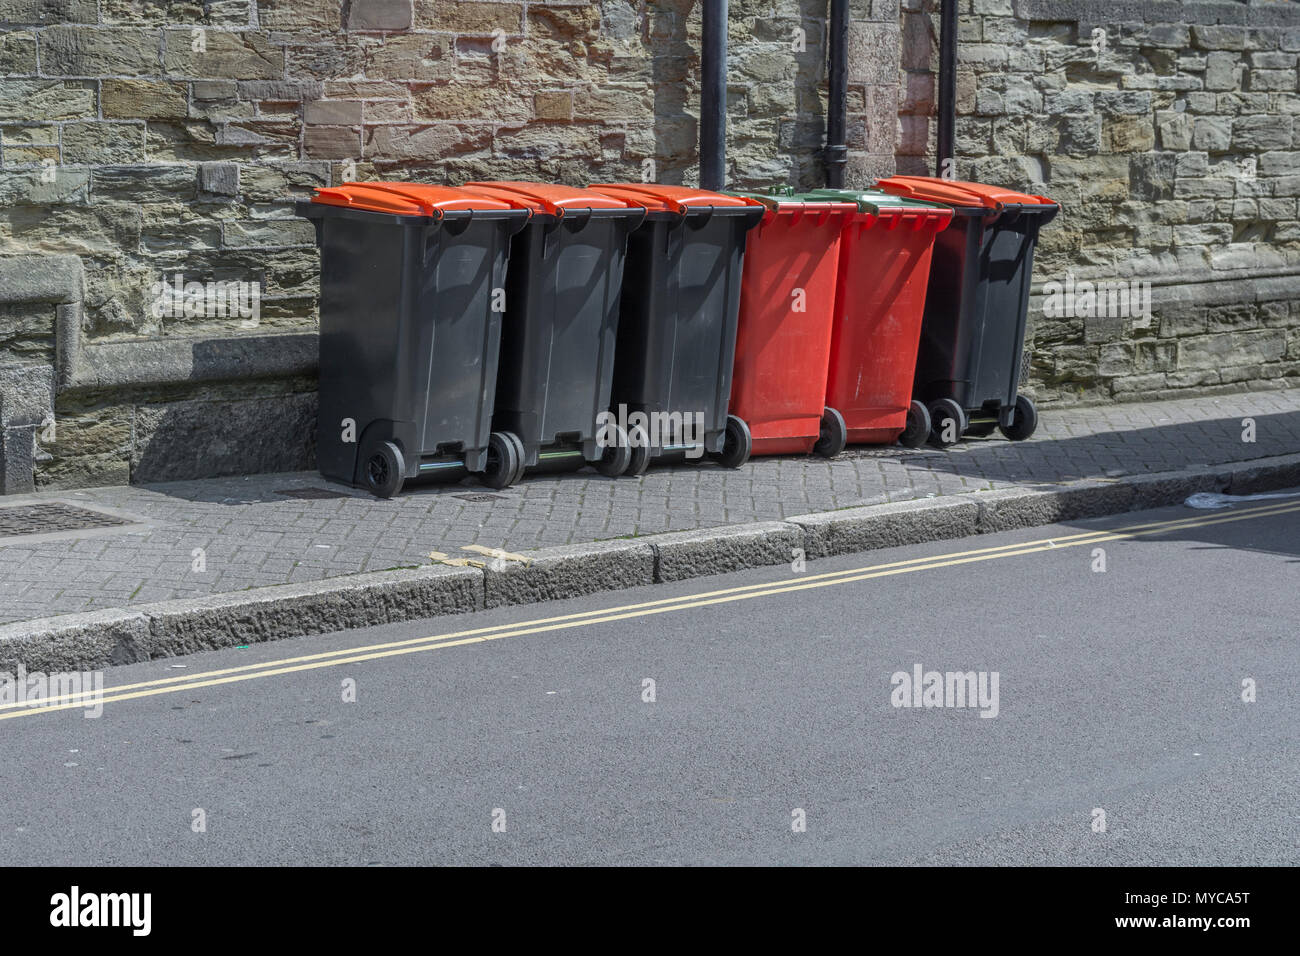 Row of industrial / commercial wheelie bins / rubbish bins outside shop premises in Truro, Cornwall. Redundant data metaphor, refuse collection. Stock Photo